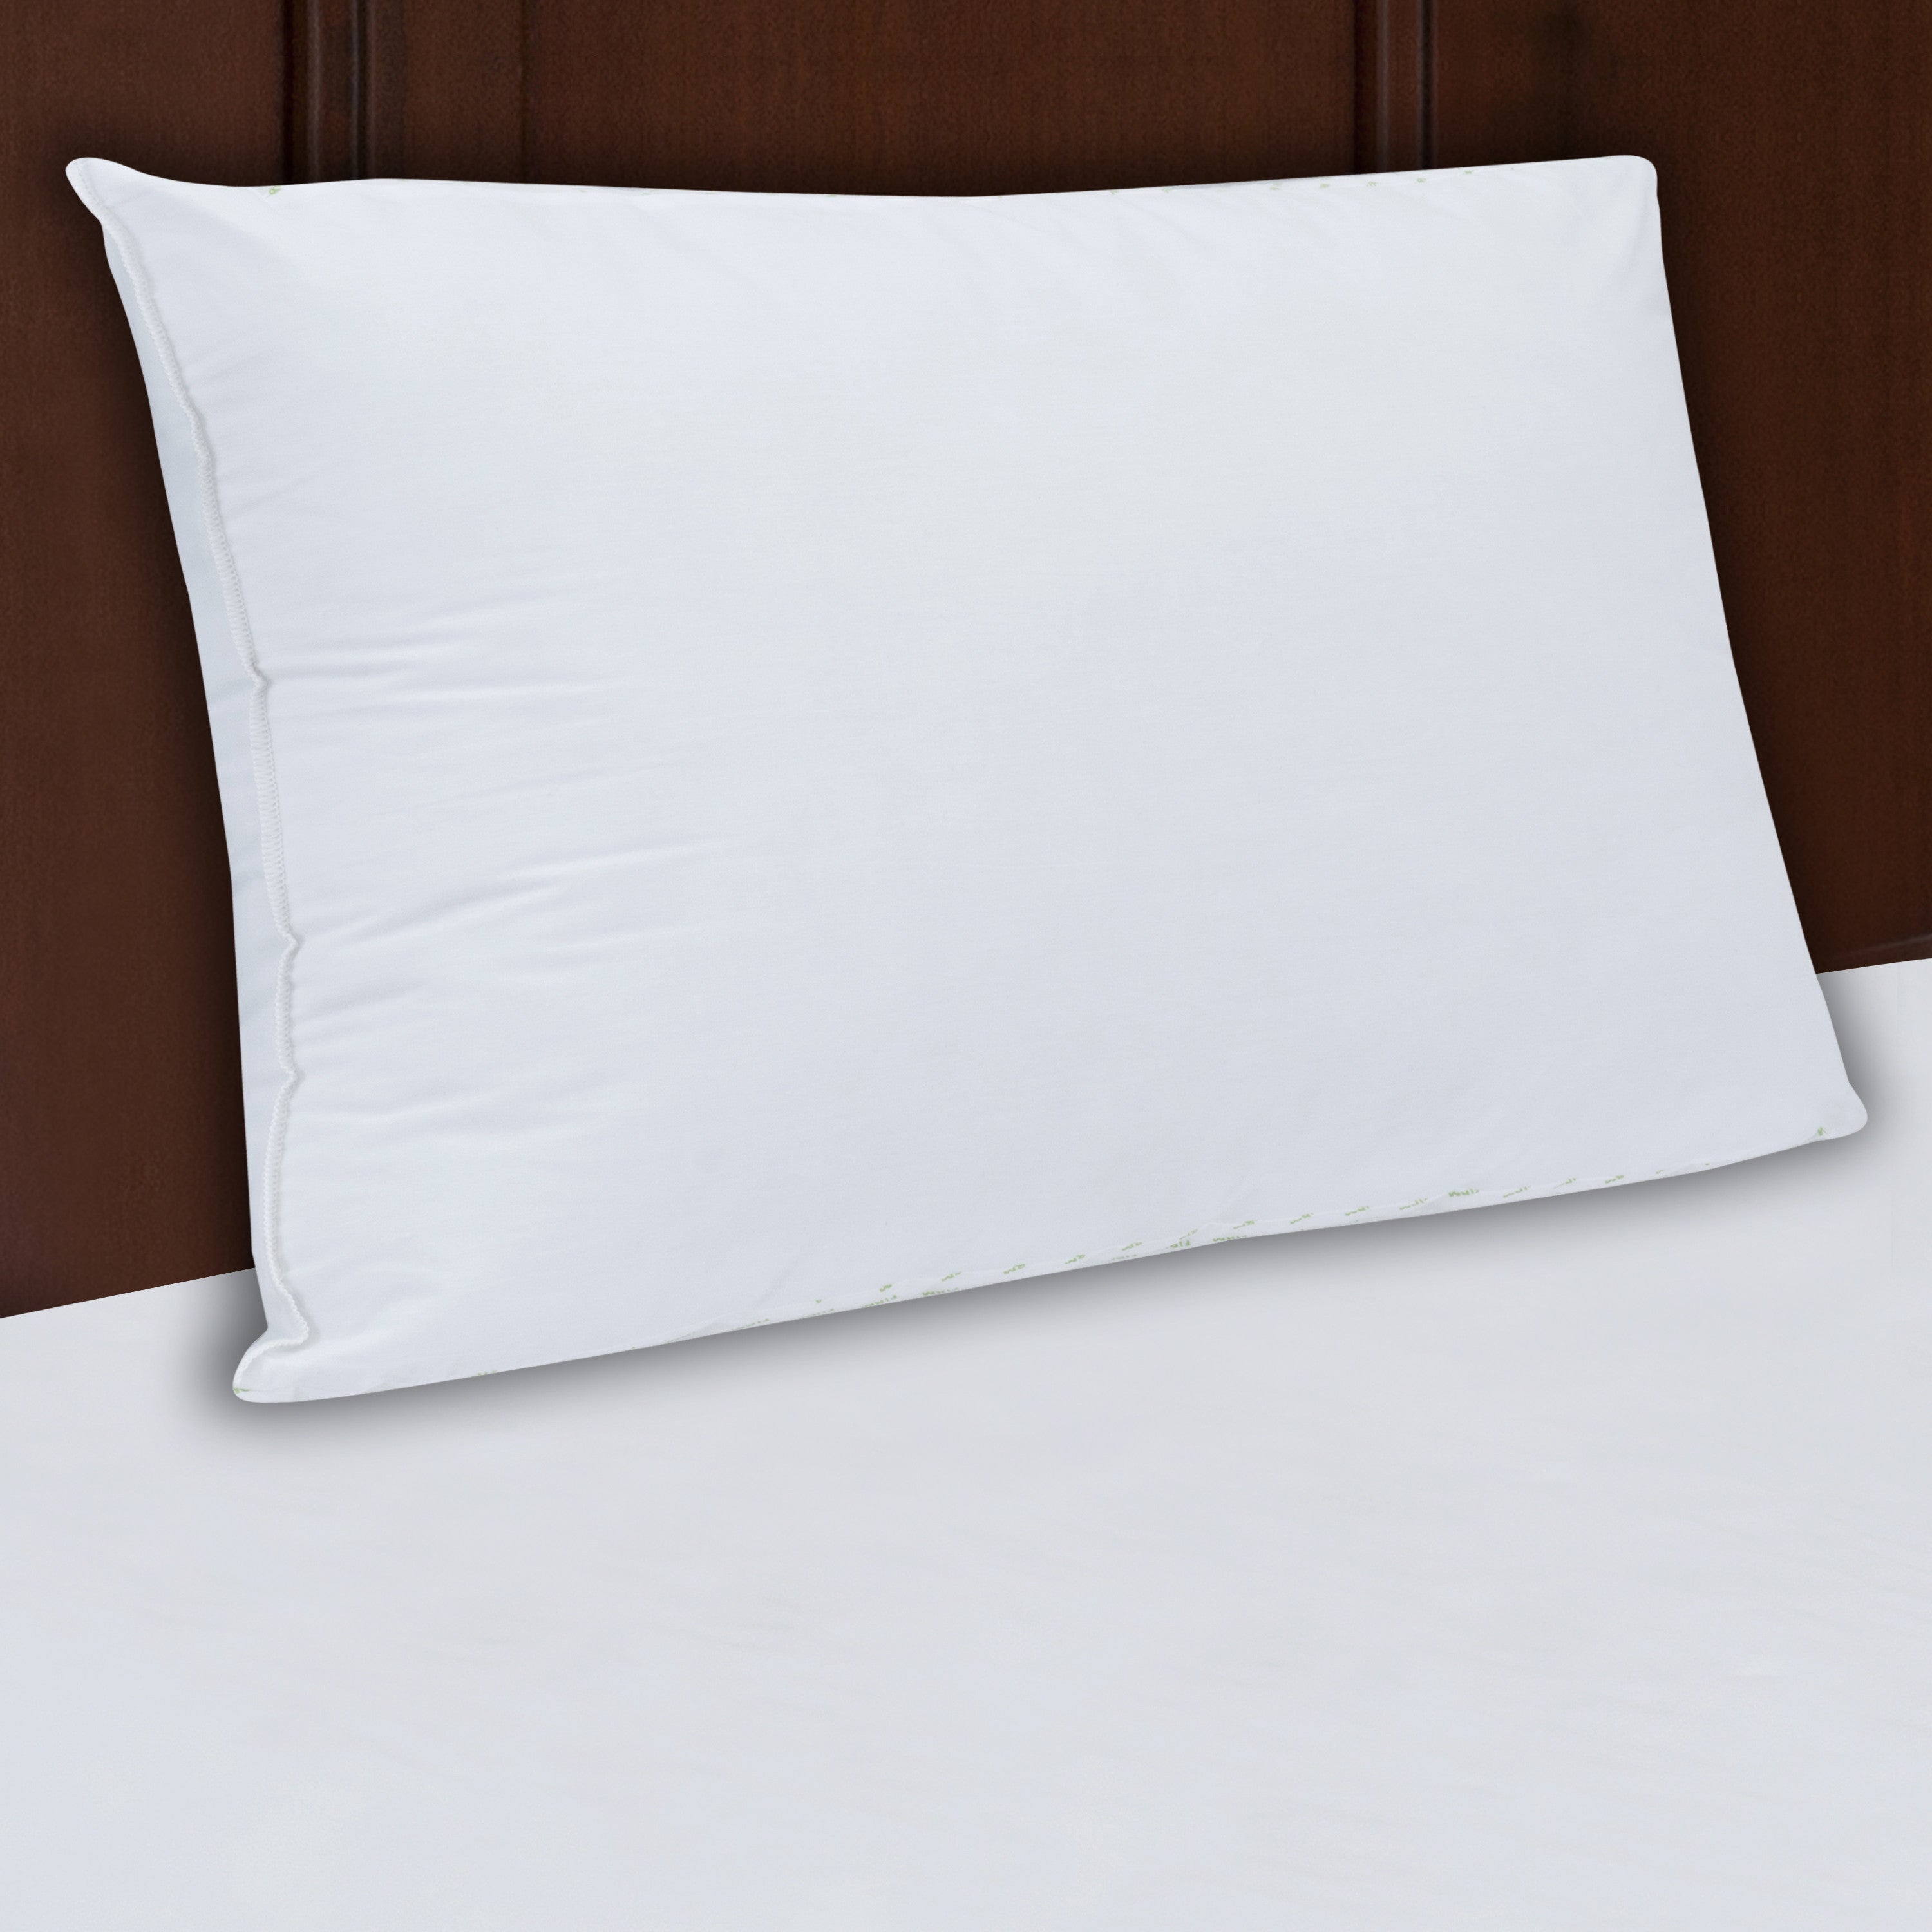 Mainstays Firm Support Pillow, Queen, 200 Thread Count Cotton